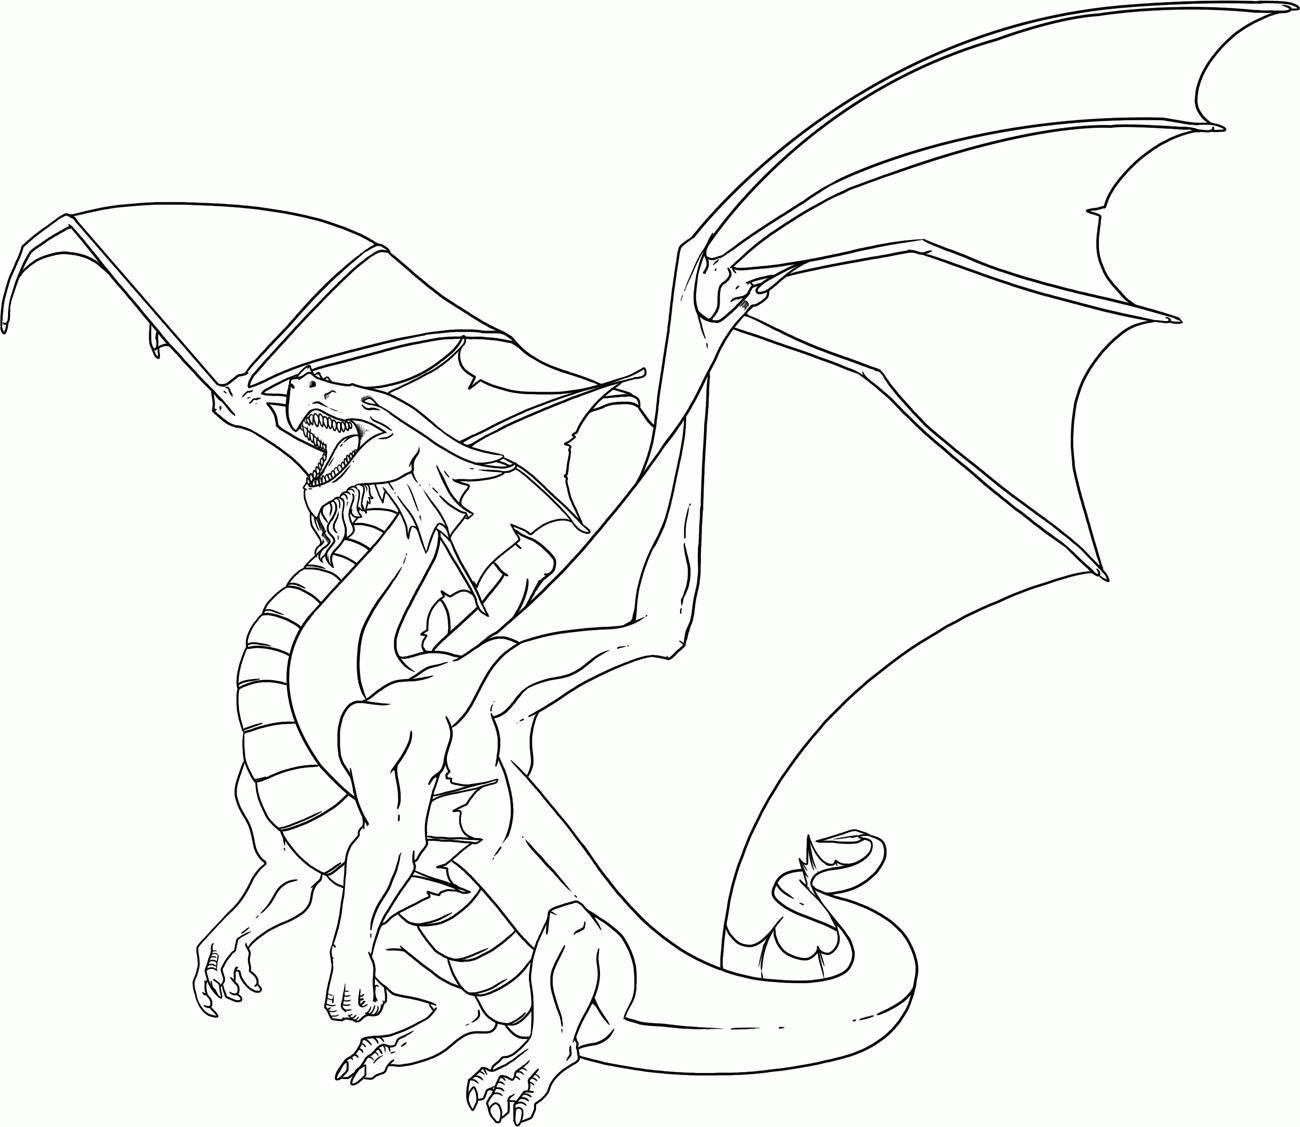 Free Fire Dragon Coloring Pages, Download Free Fire Dragon ...